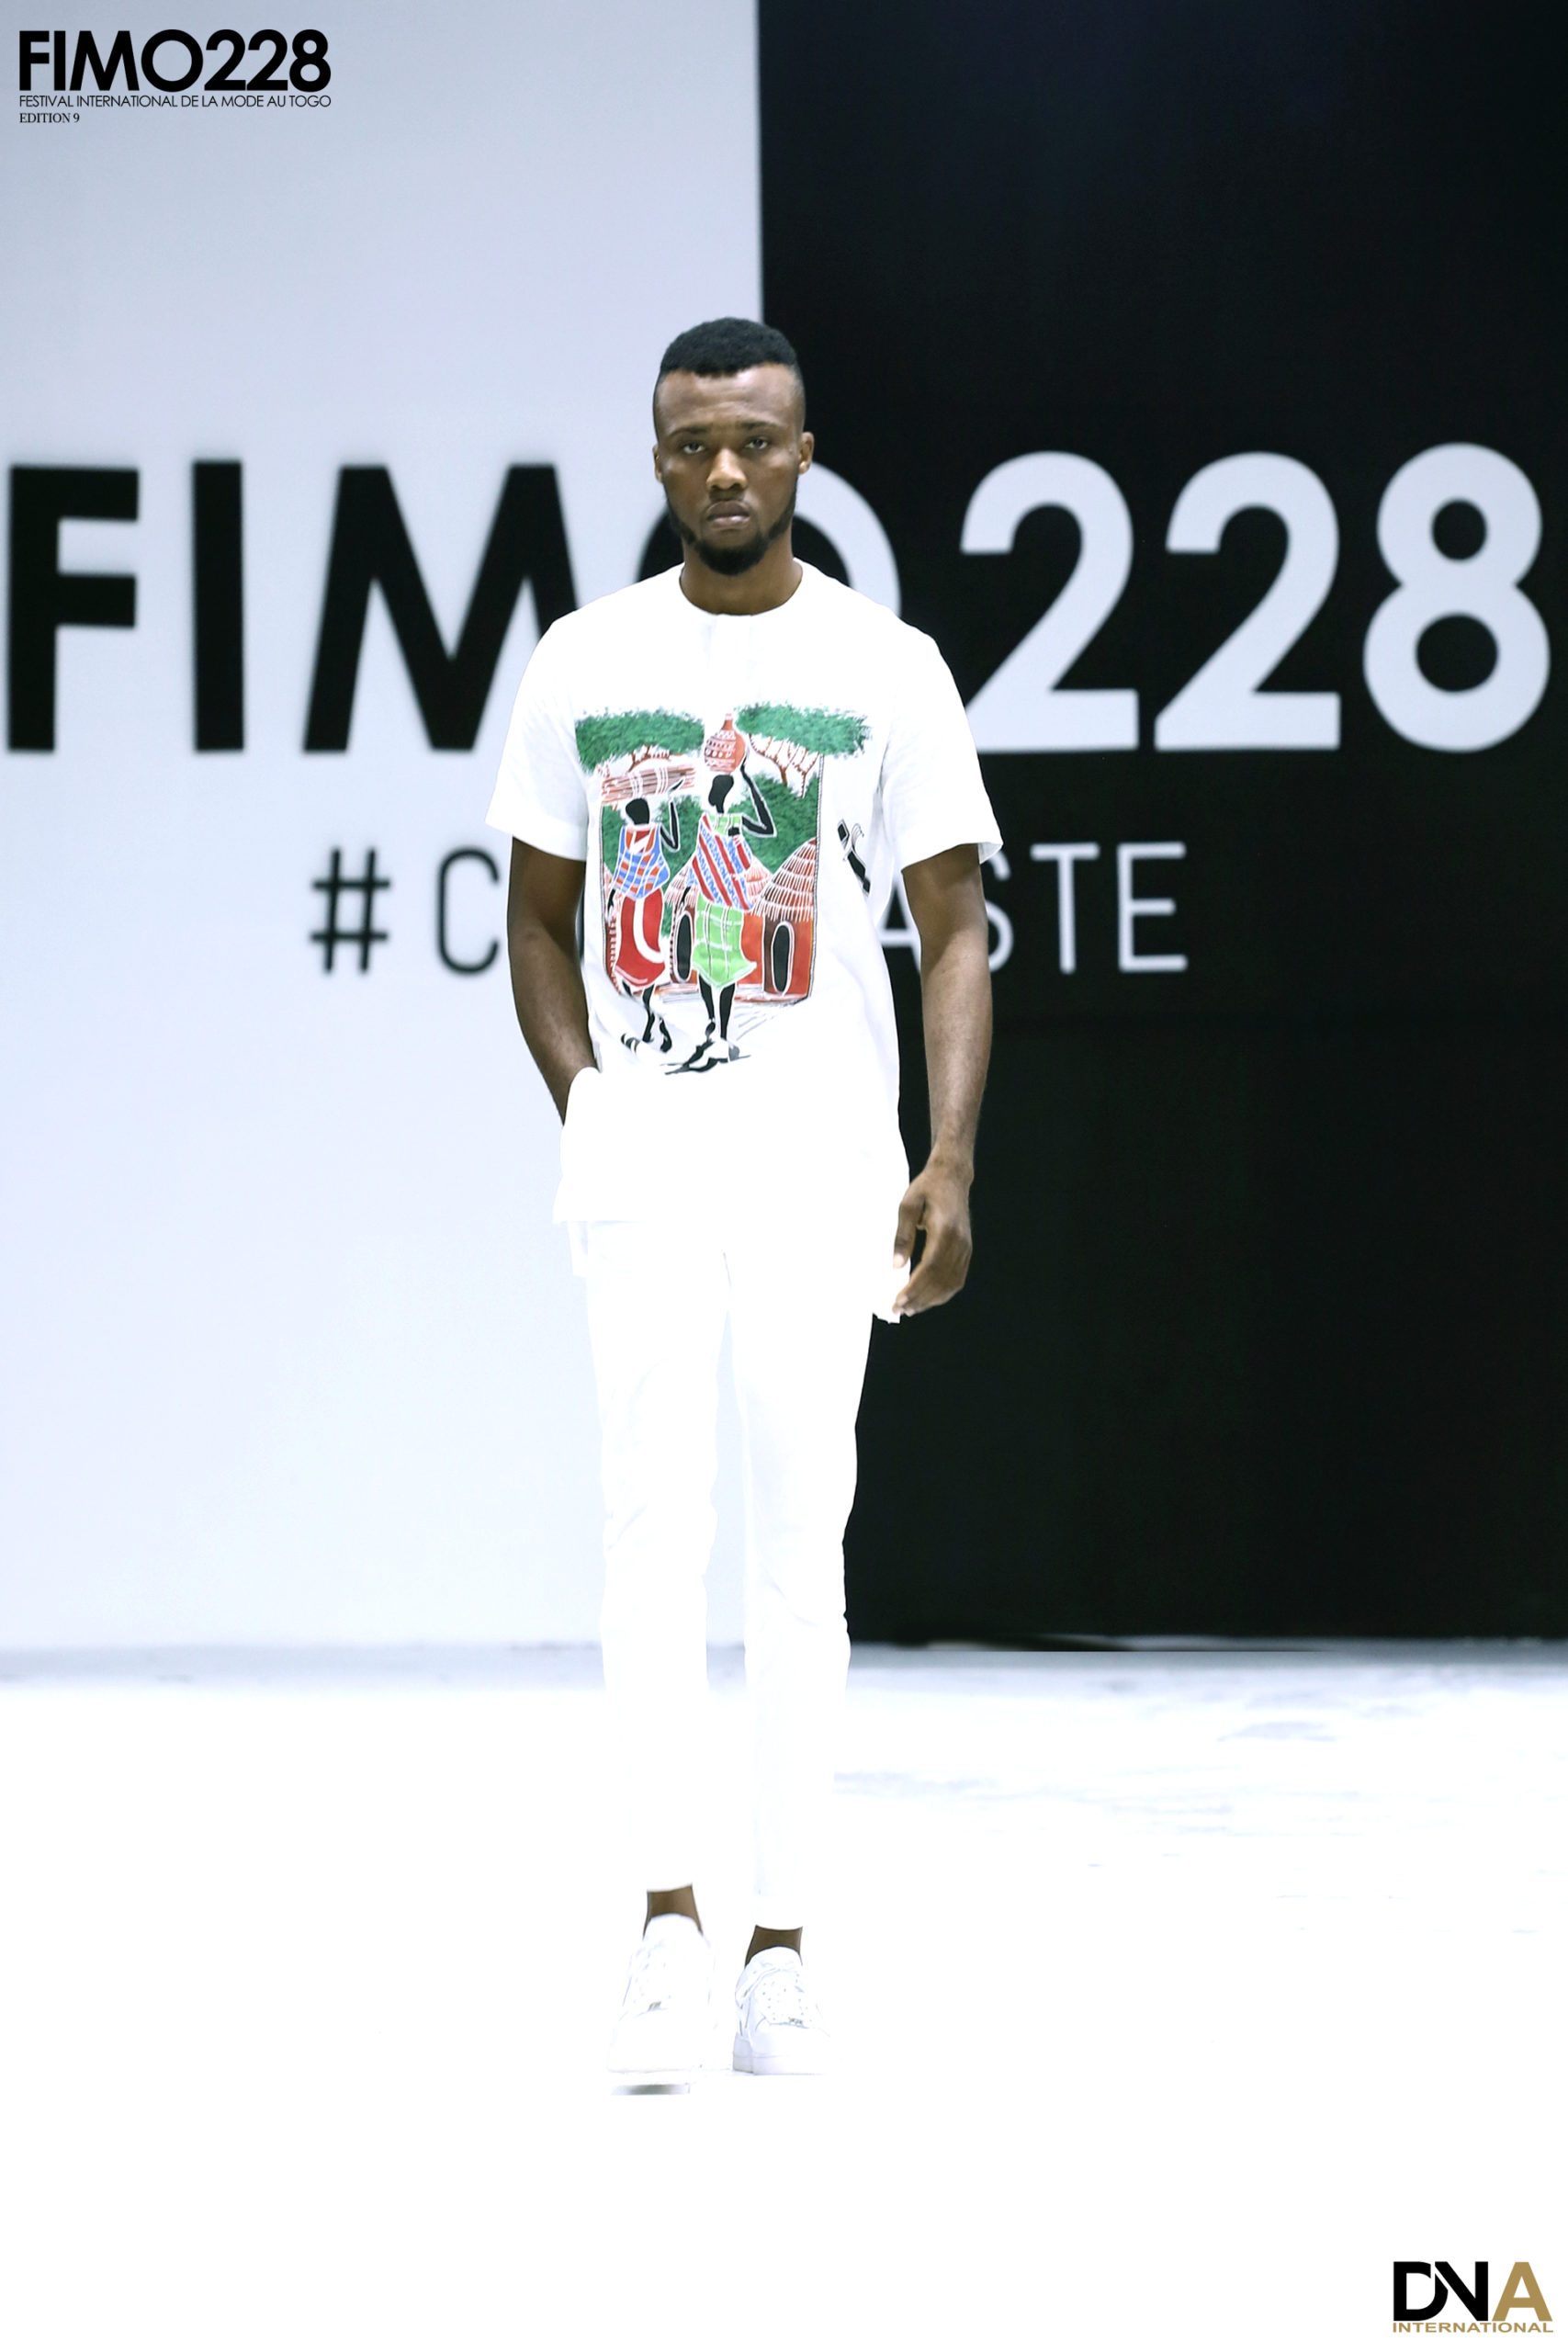 DK STYLE PRESENTS HIS NEW COLLECTION DURING FIMO 228 EDITION 9